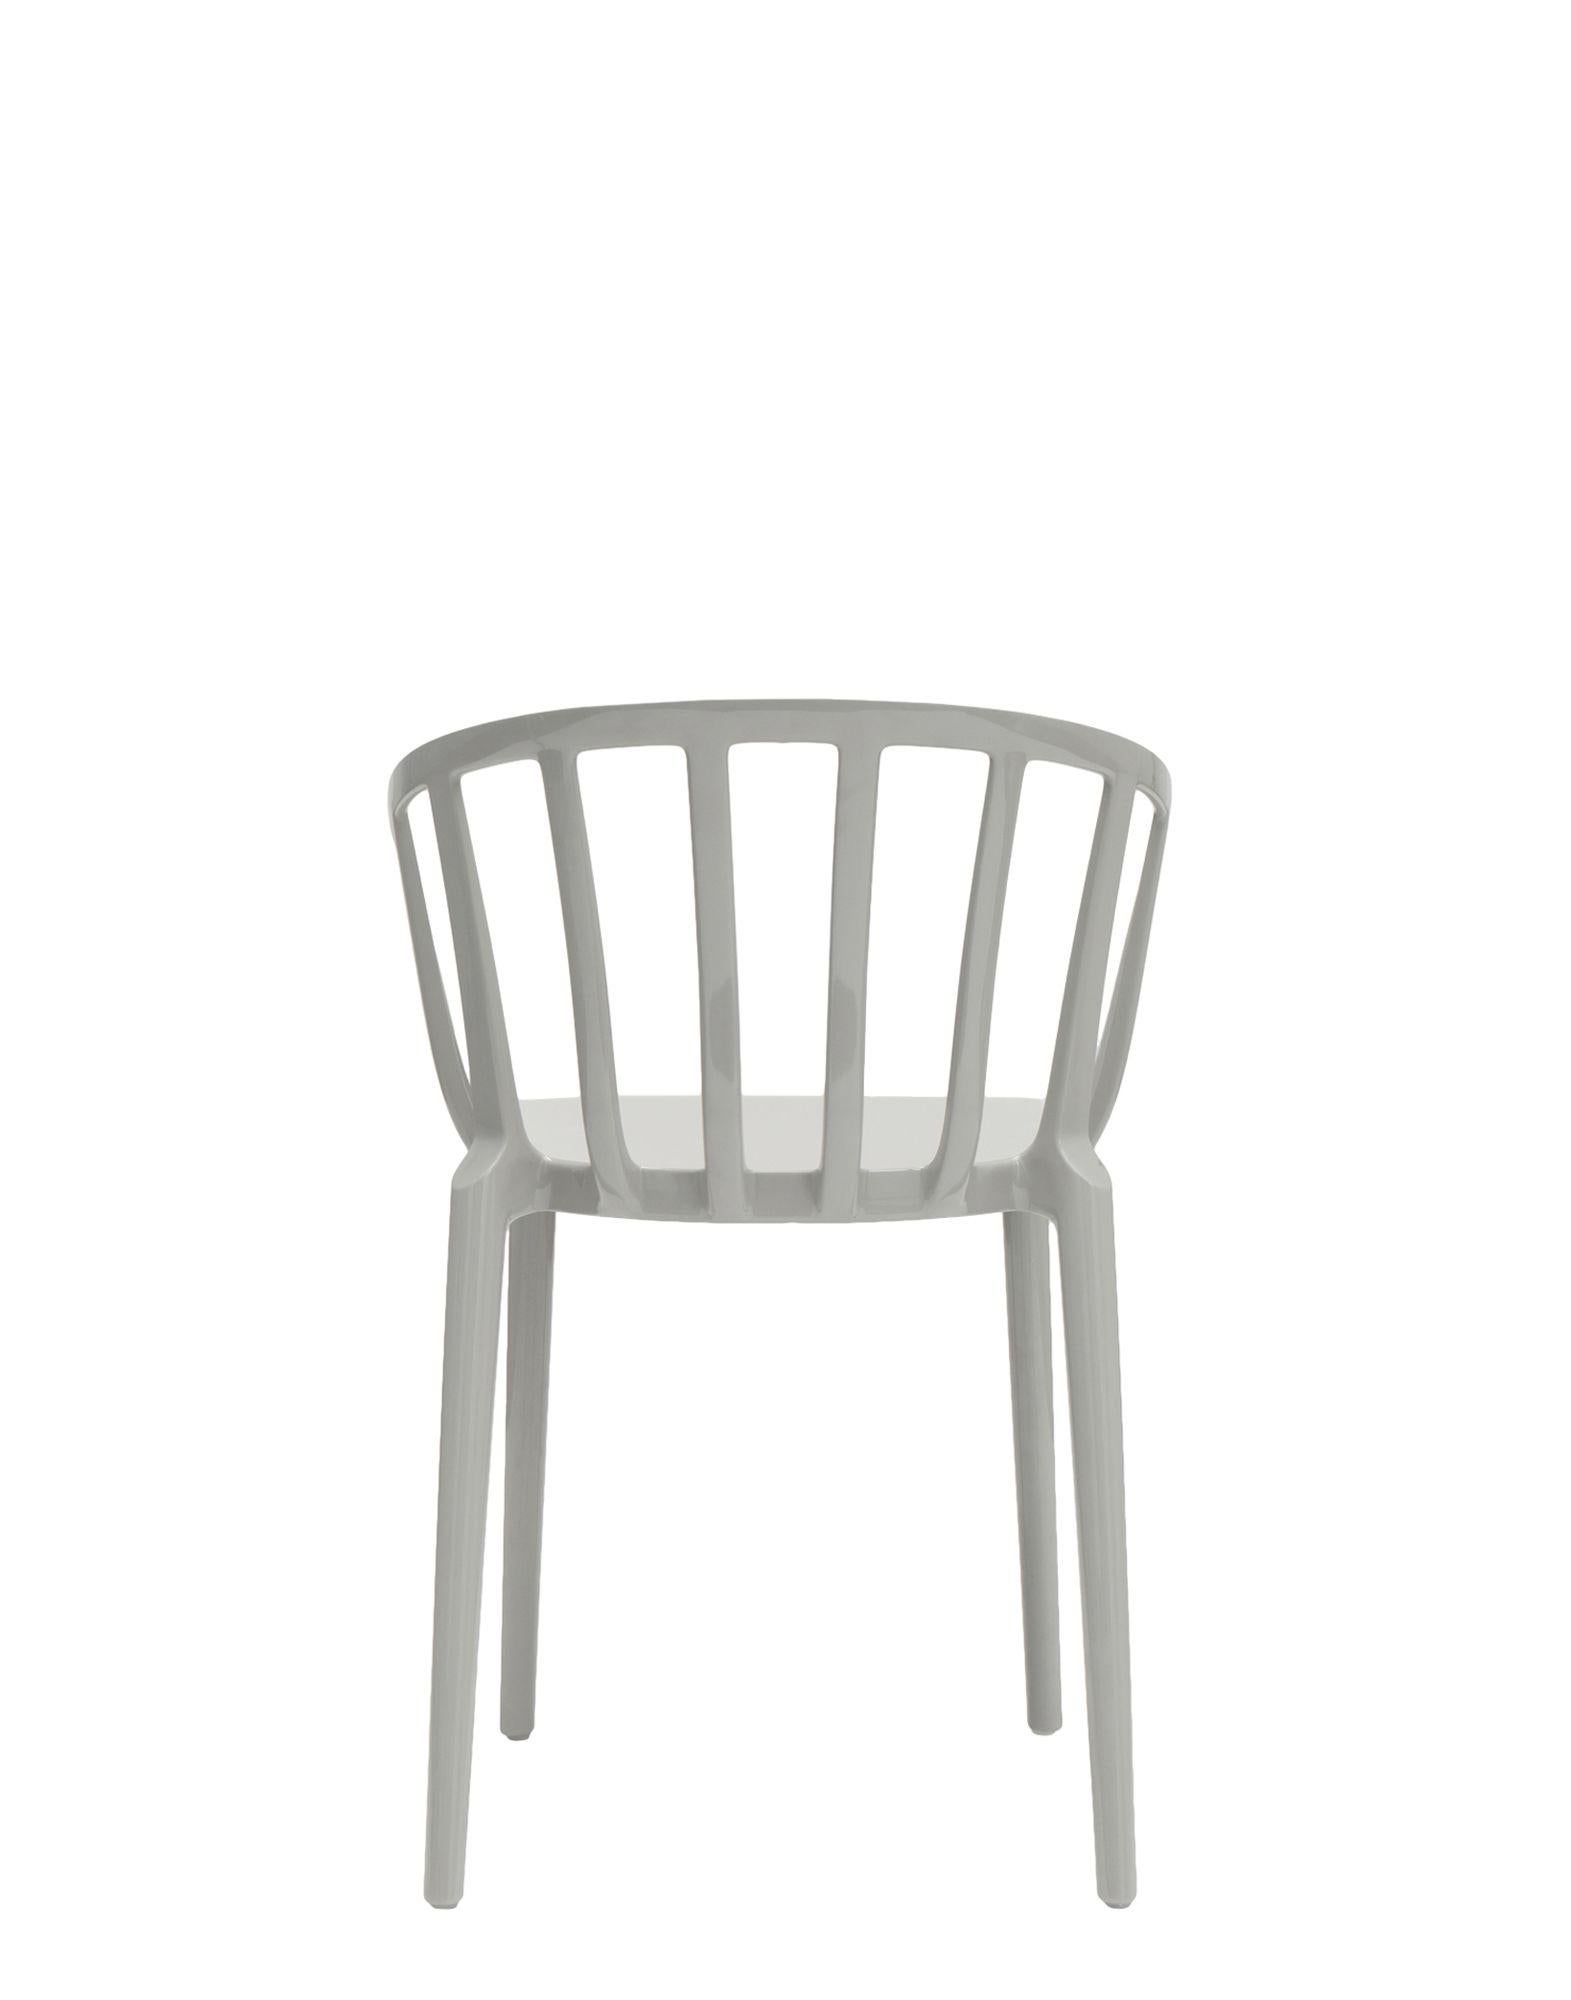 Italian Set of 2 Kartell Venice Chairs in Grey by Philippe Starck For Sale